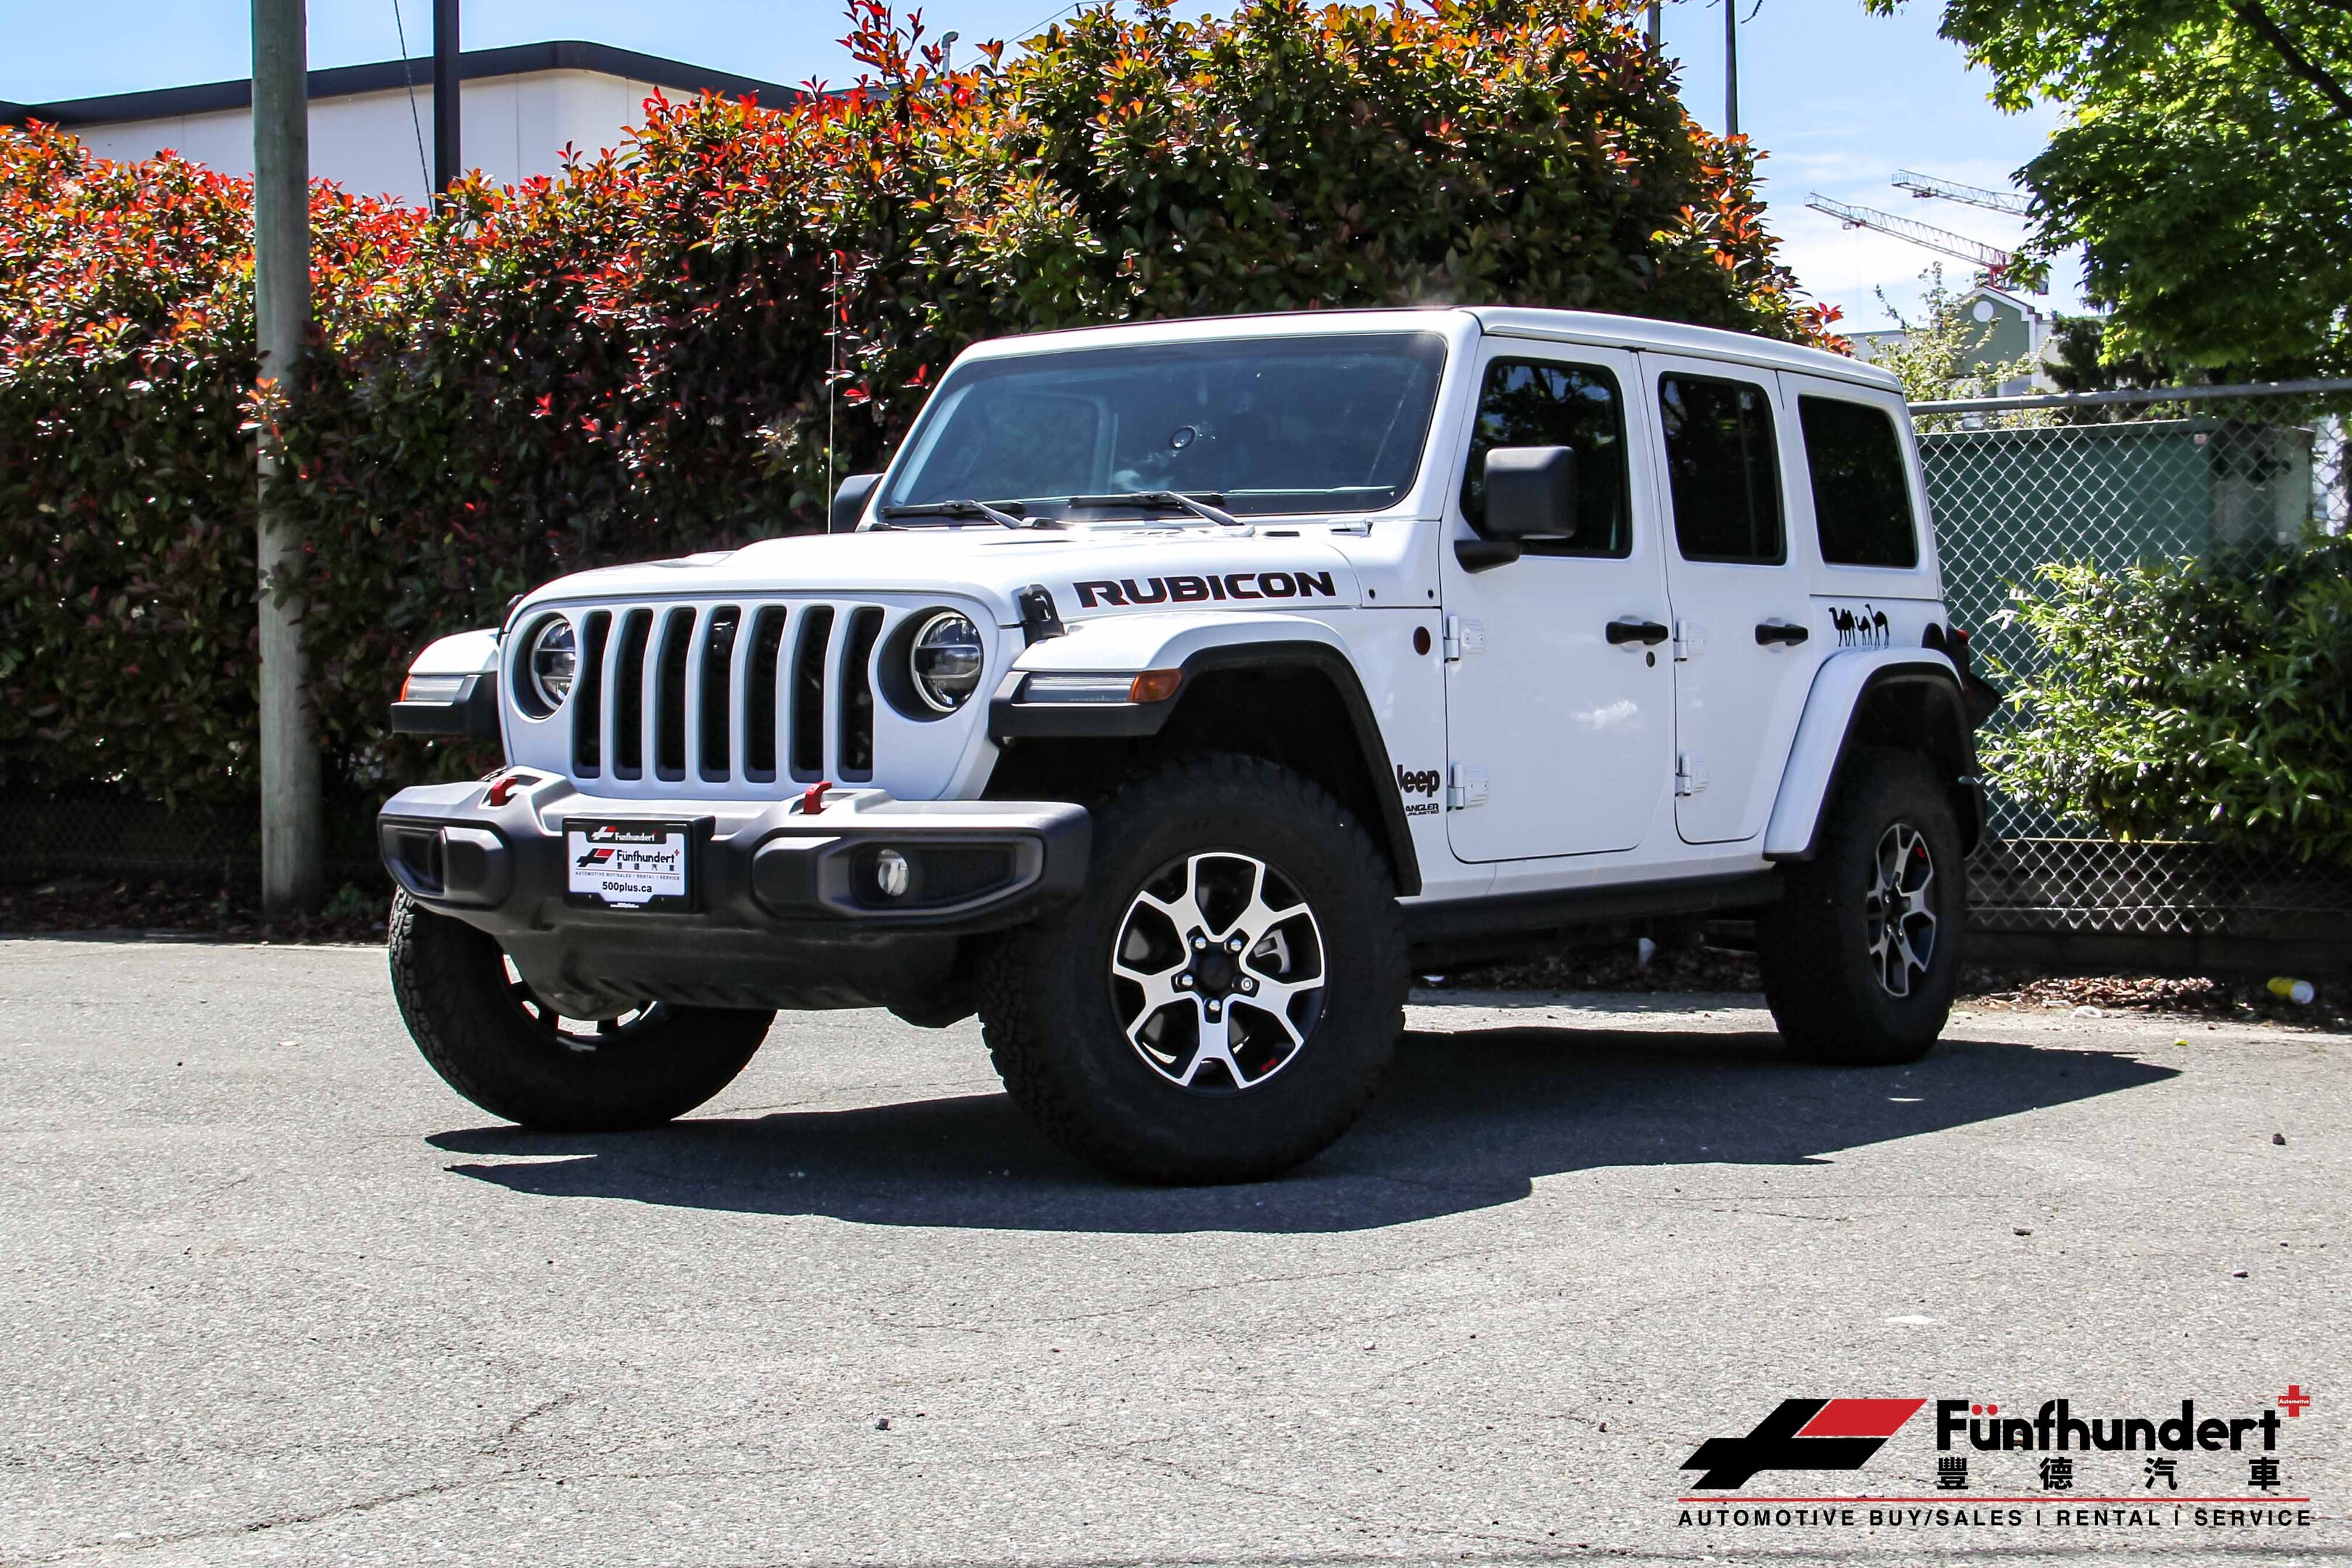 2021 Jeep Wrangler Rubicon 4dr/Sky Roof/3.6L/One Owner/No Accidents